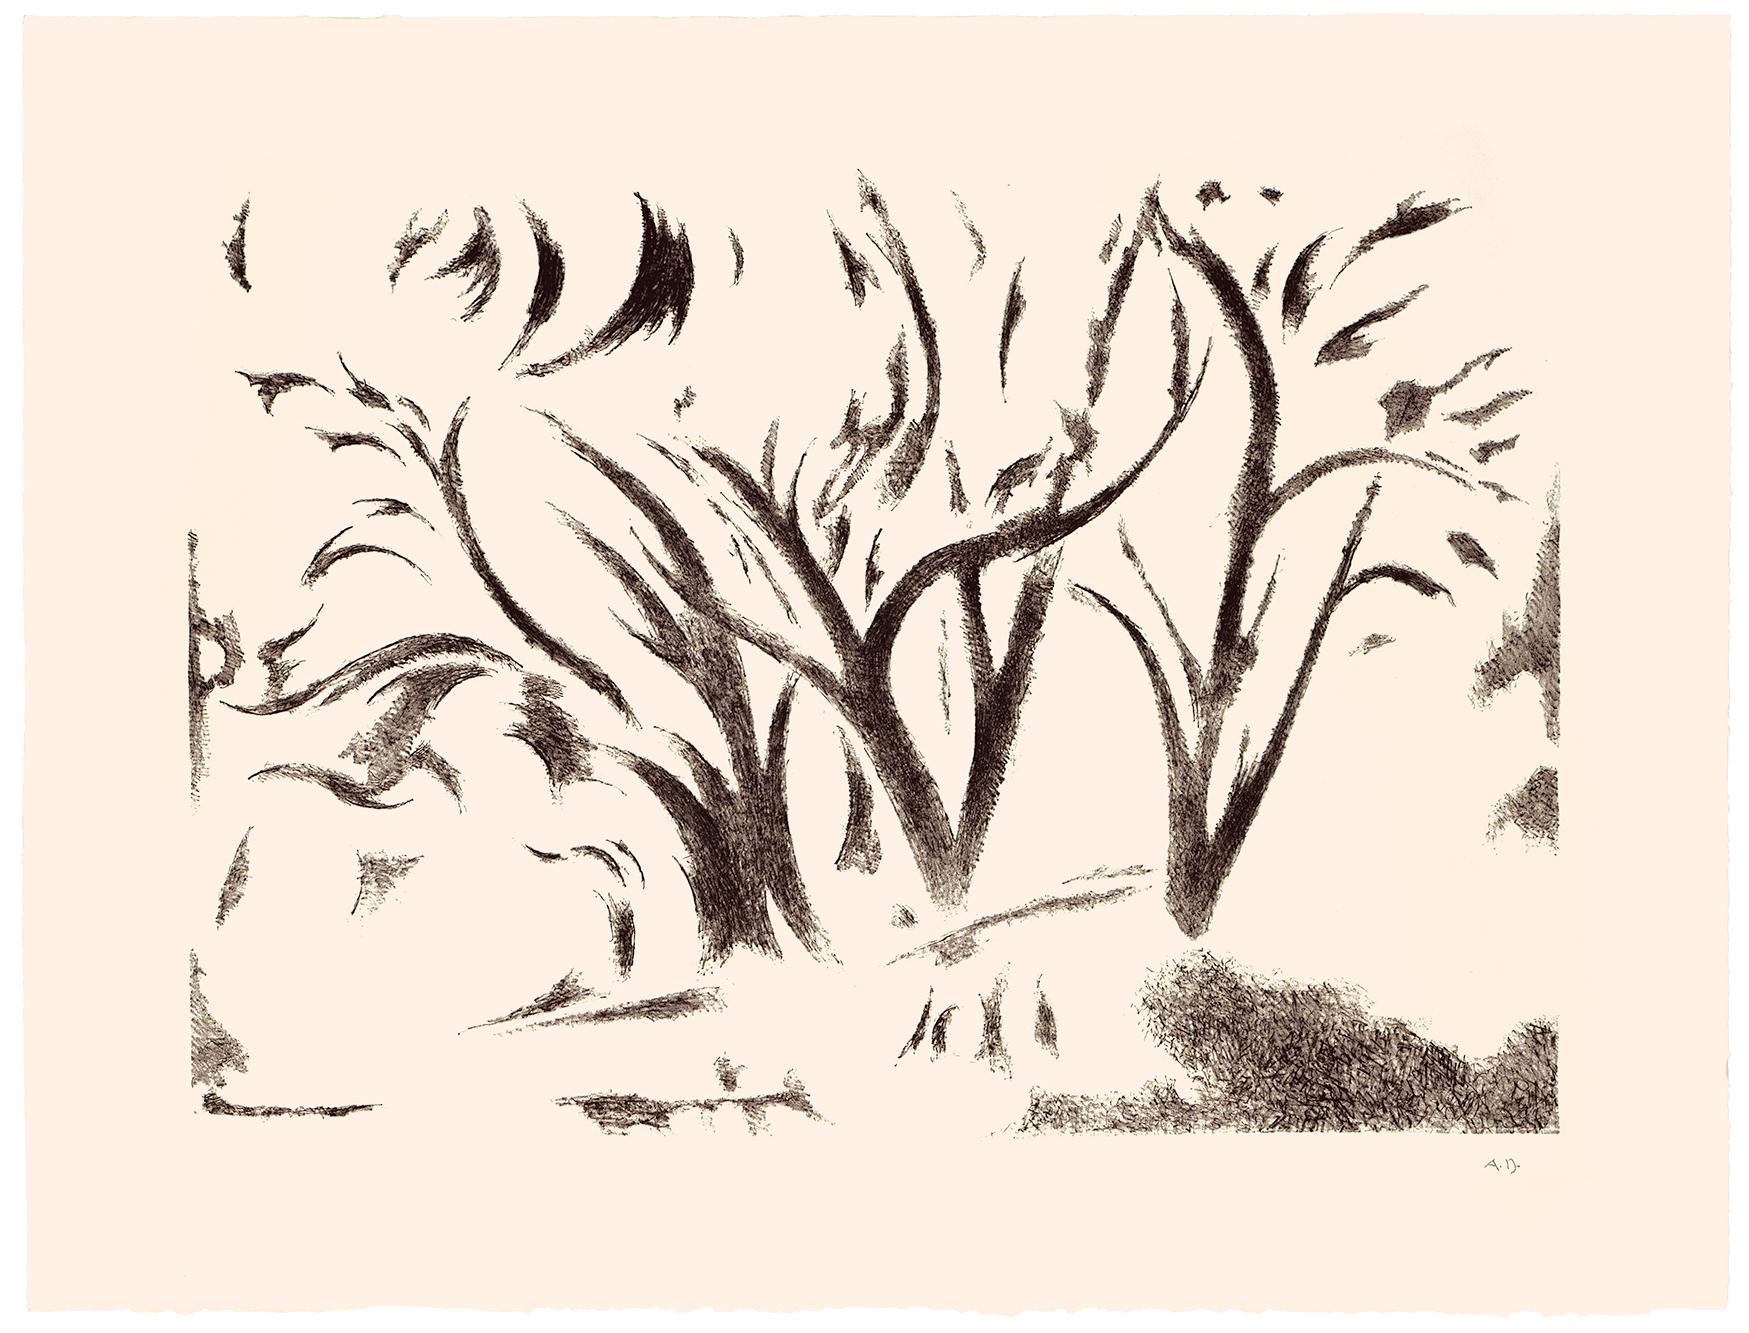 Trees in Ranchitos I — 1970s Taos Modernism - Print by Andrew Dasburg